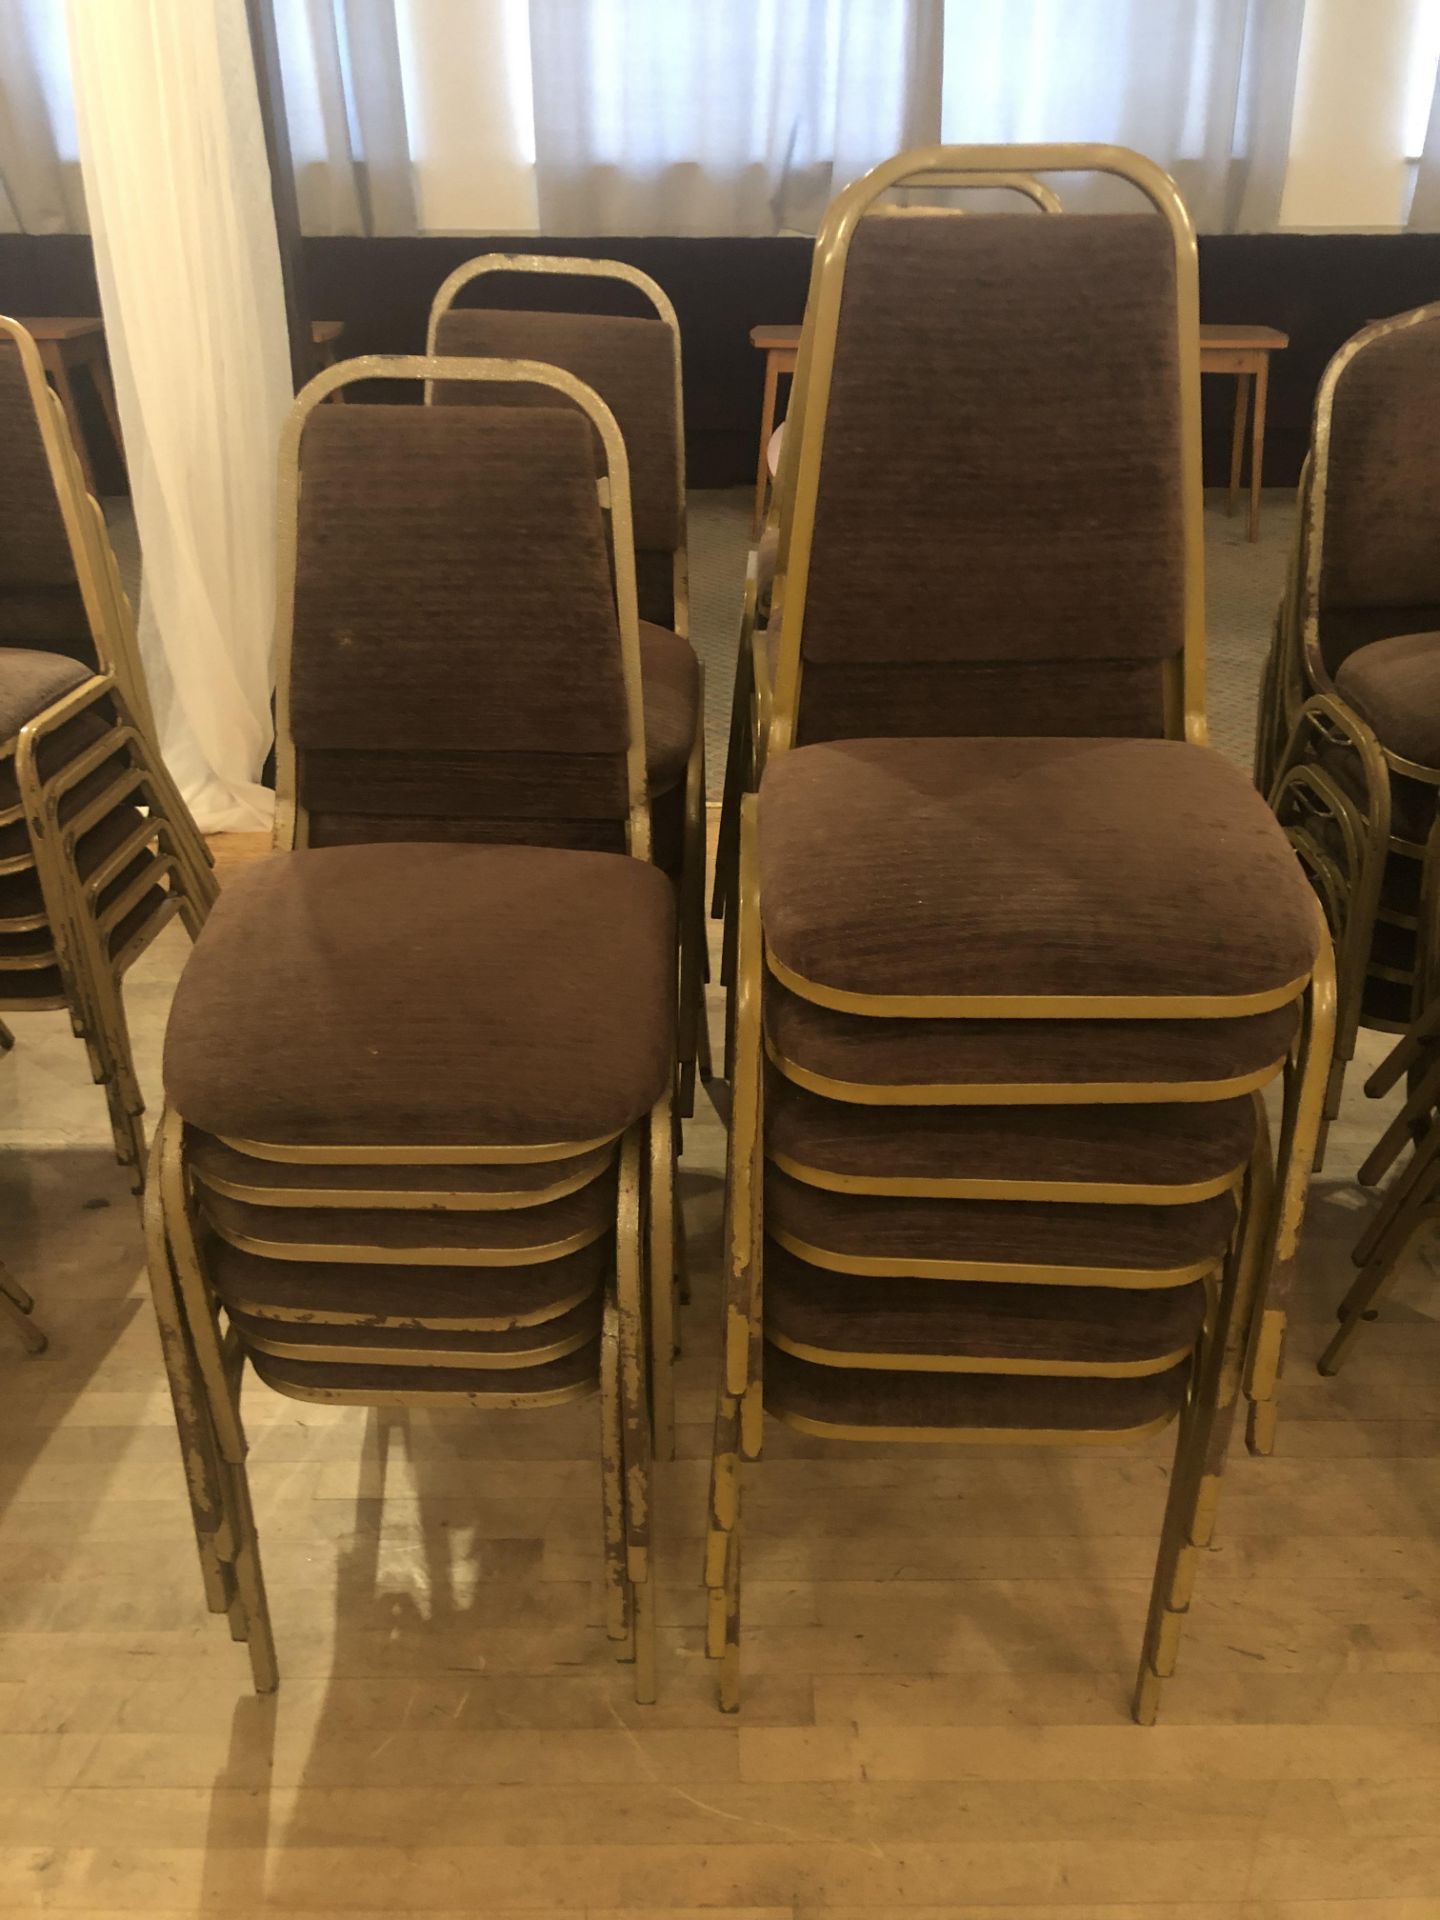 30 x Fabric Banquet Chairs in Brown